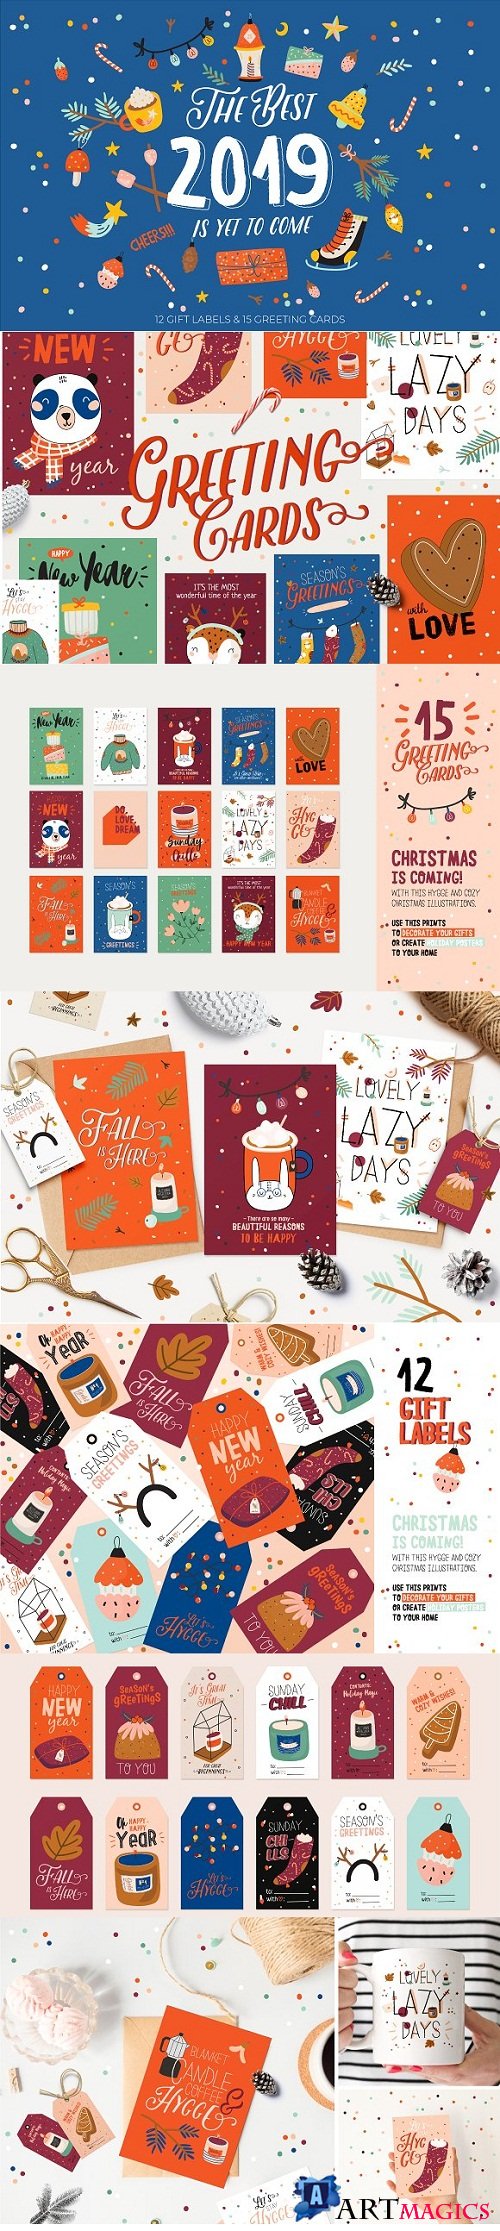 Cute Christmas cards & gift labels - 3136152